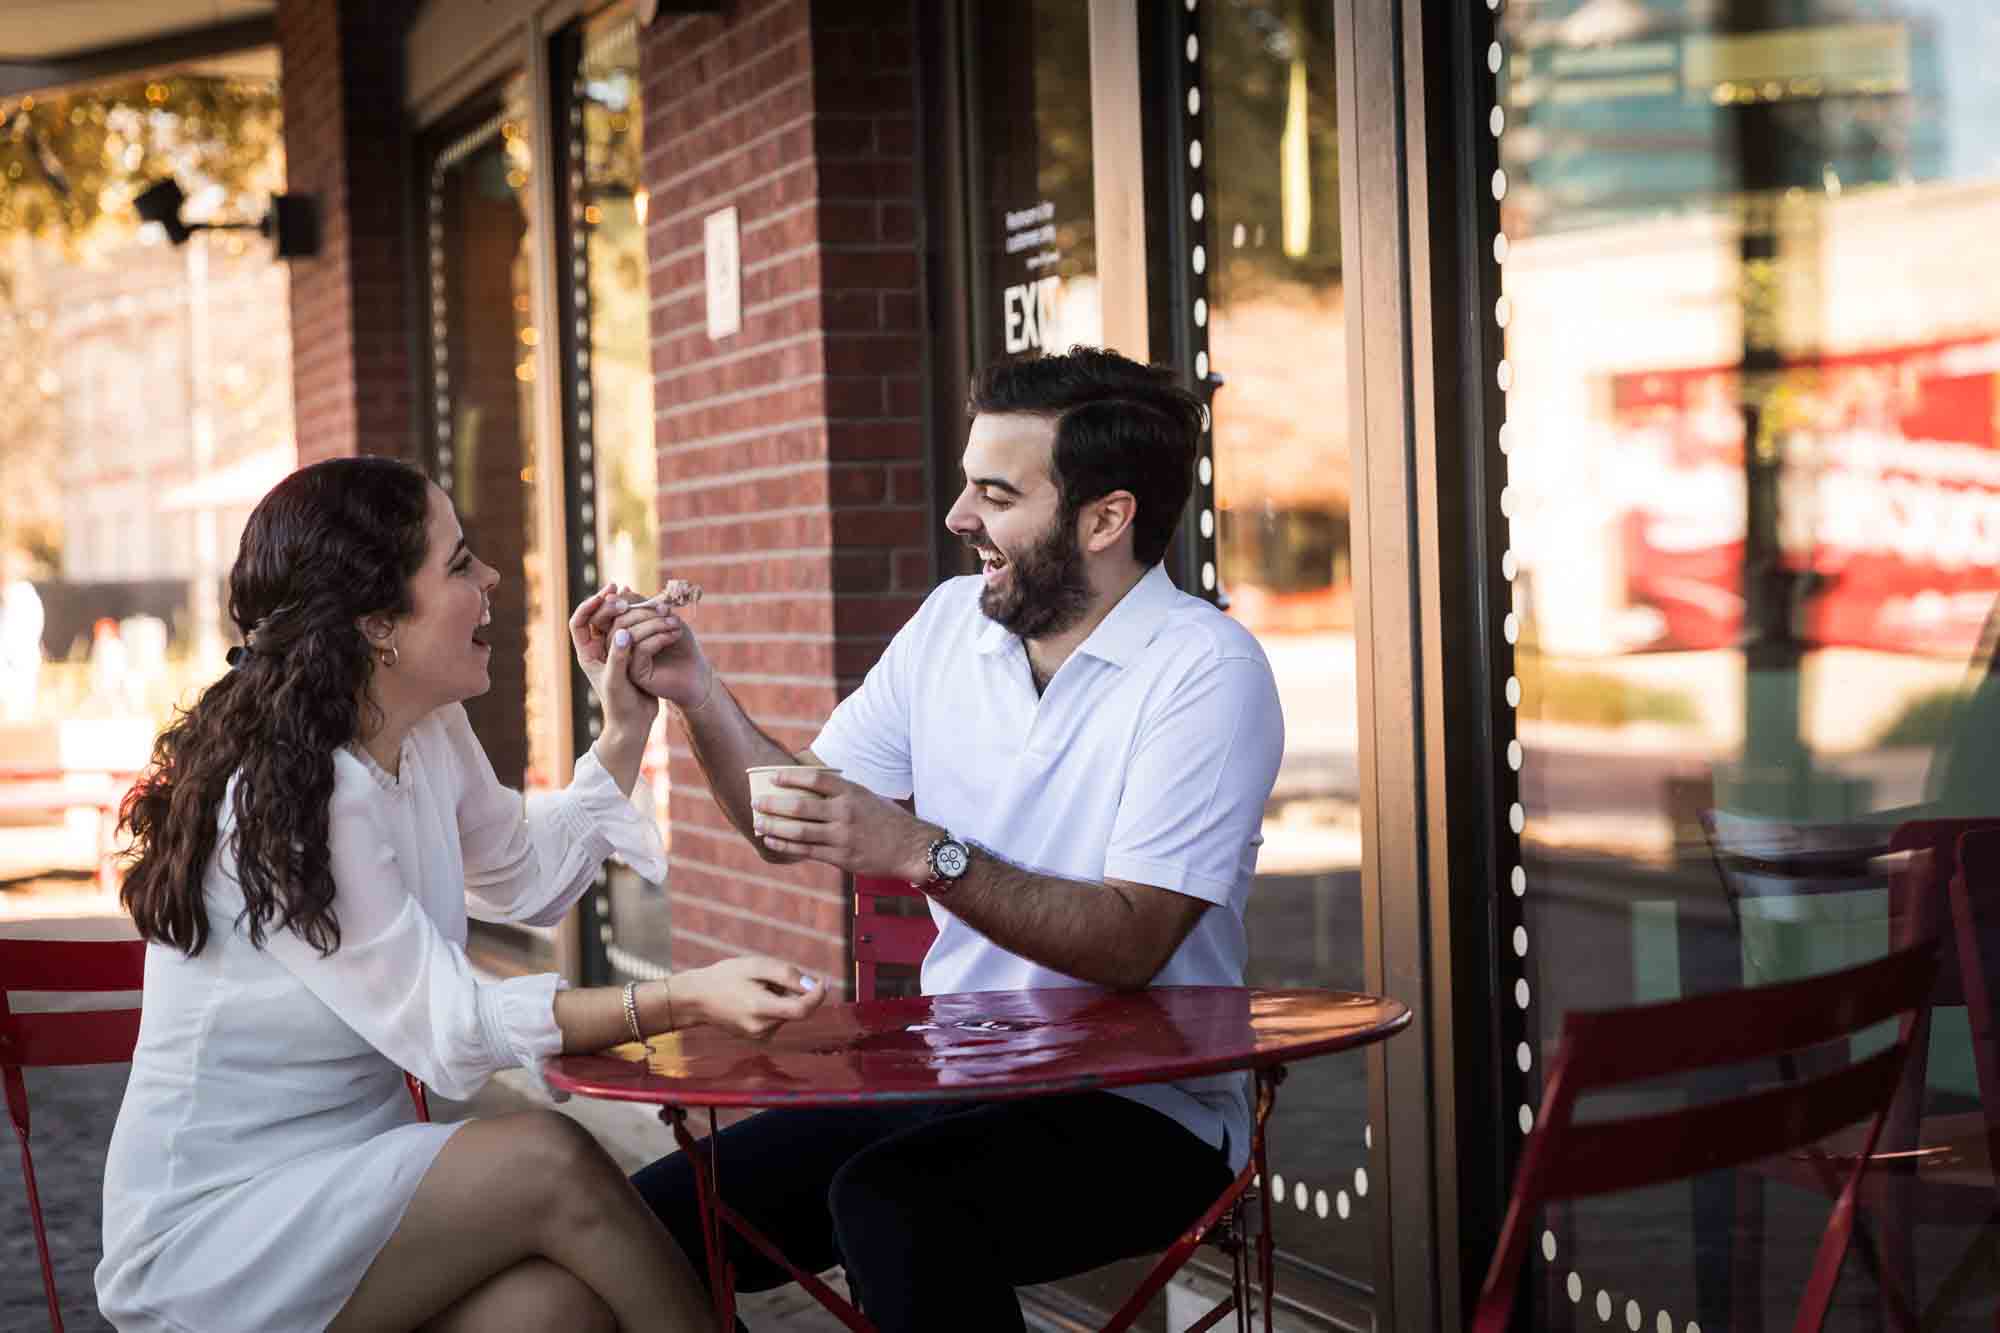 Man feeding woman ice cream while sitting at red table during a Pearl engagement portrait session